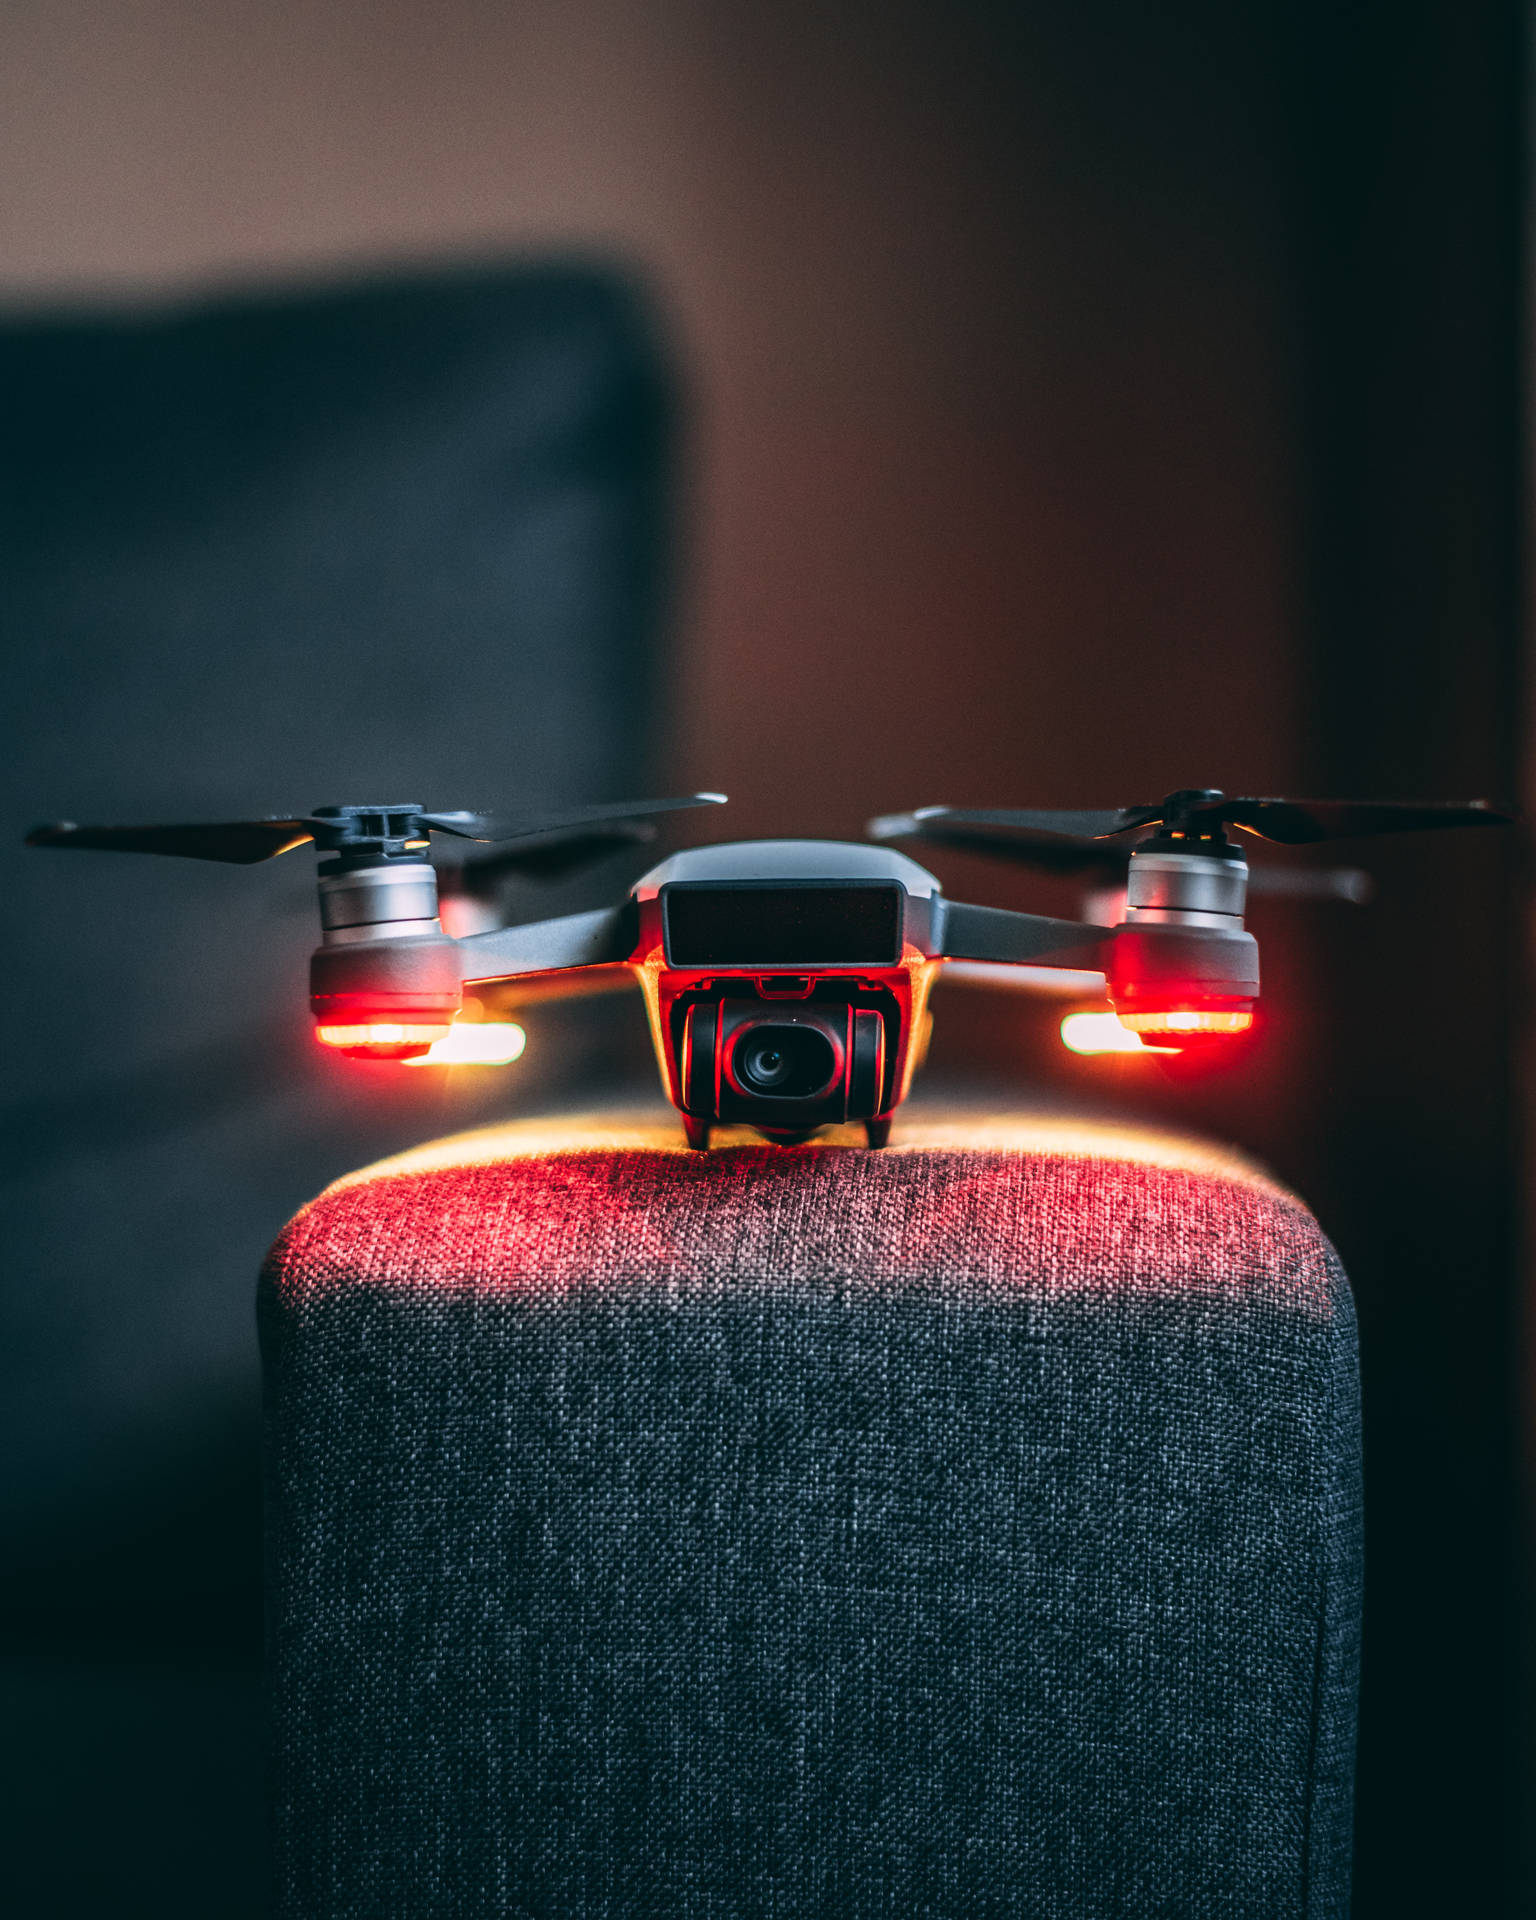 The New Age Of Technology: A Drone On An Armchair Background